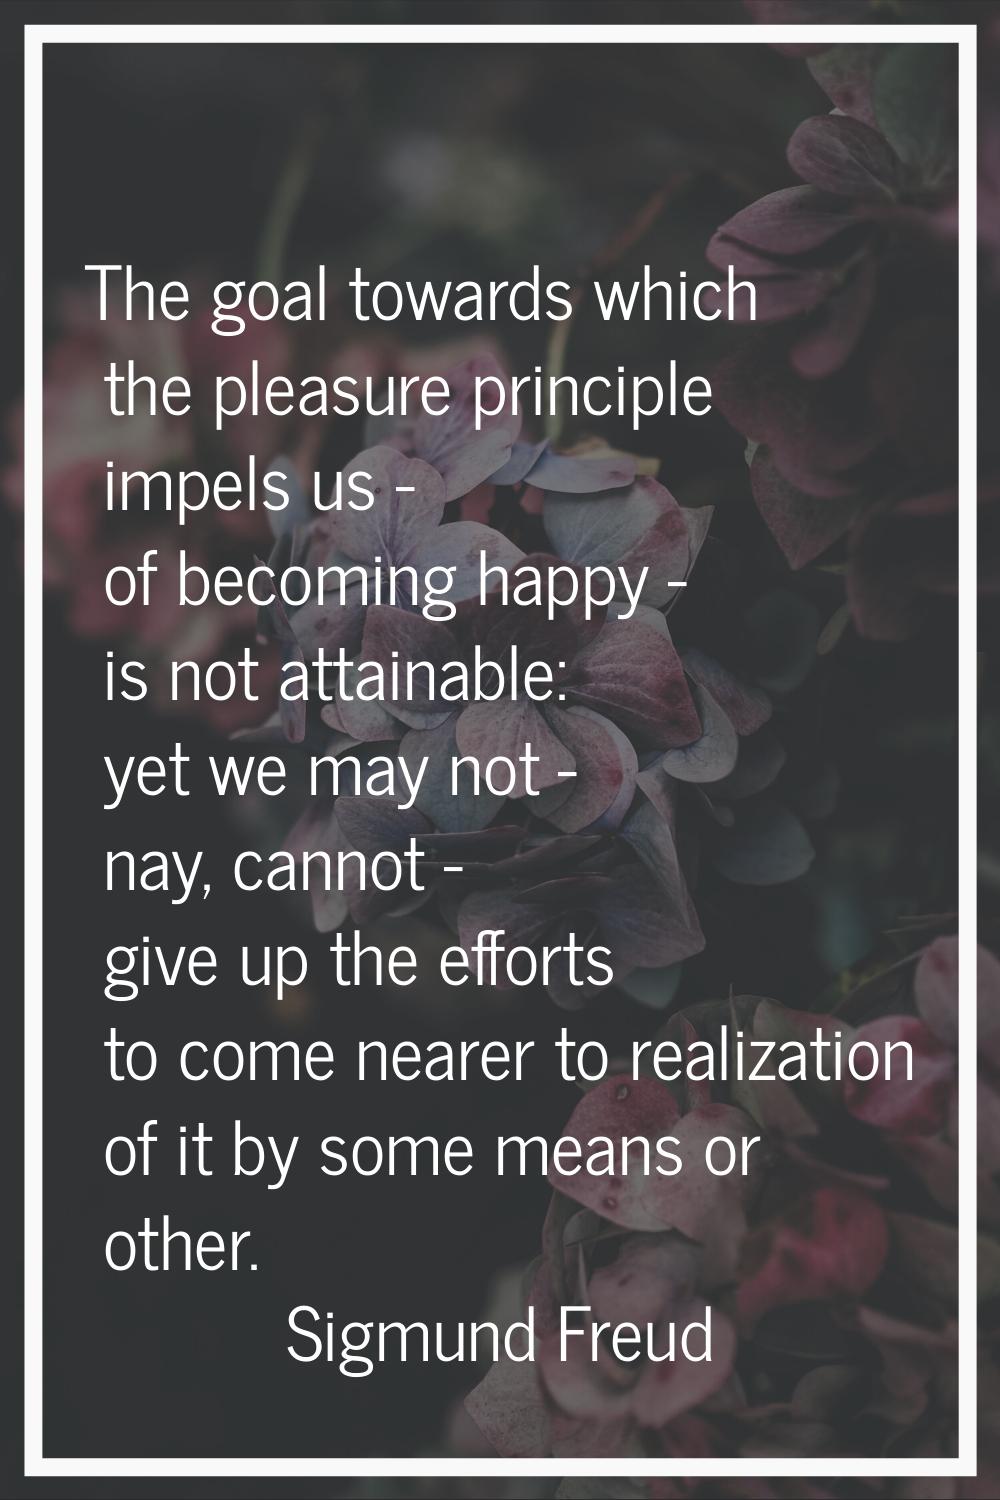 The goal towards which the pleasure principle impels us - of becoming happy - is not attainable: ye